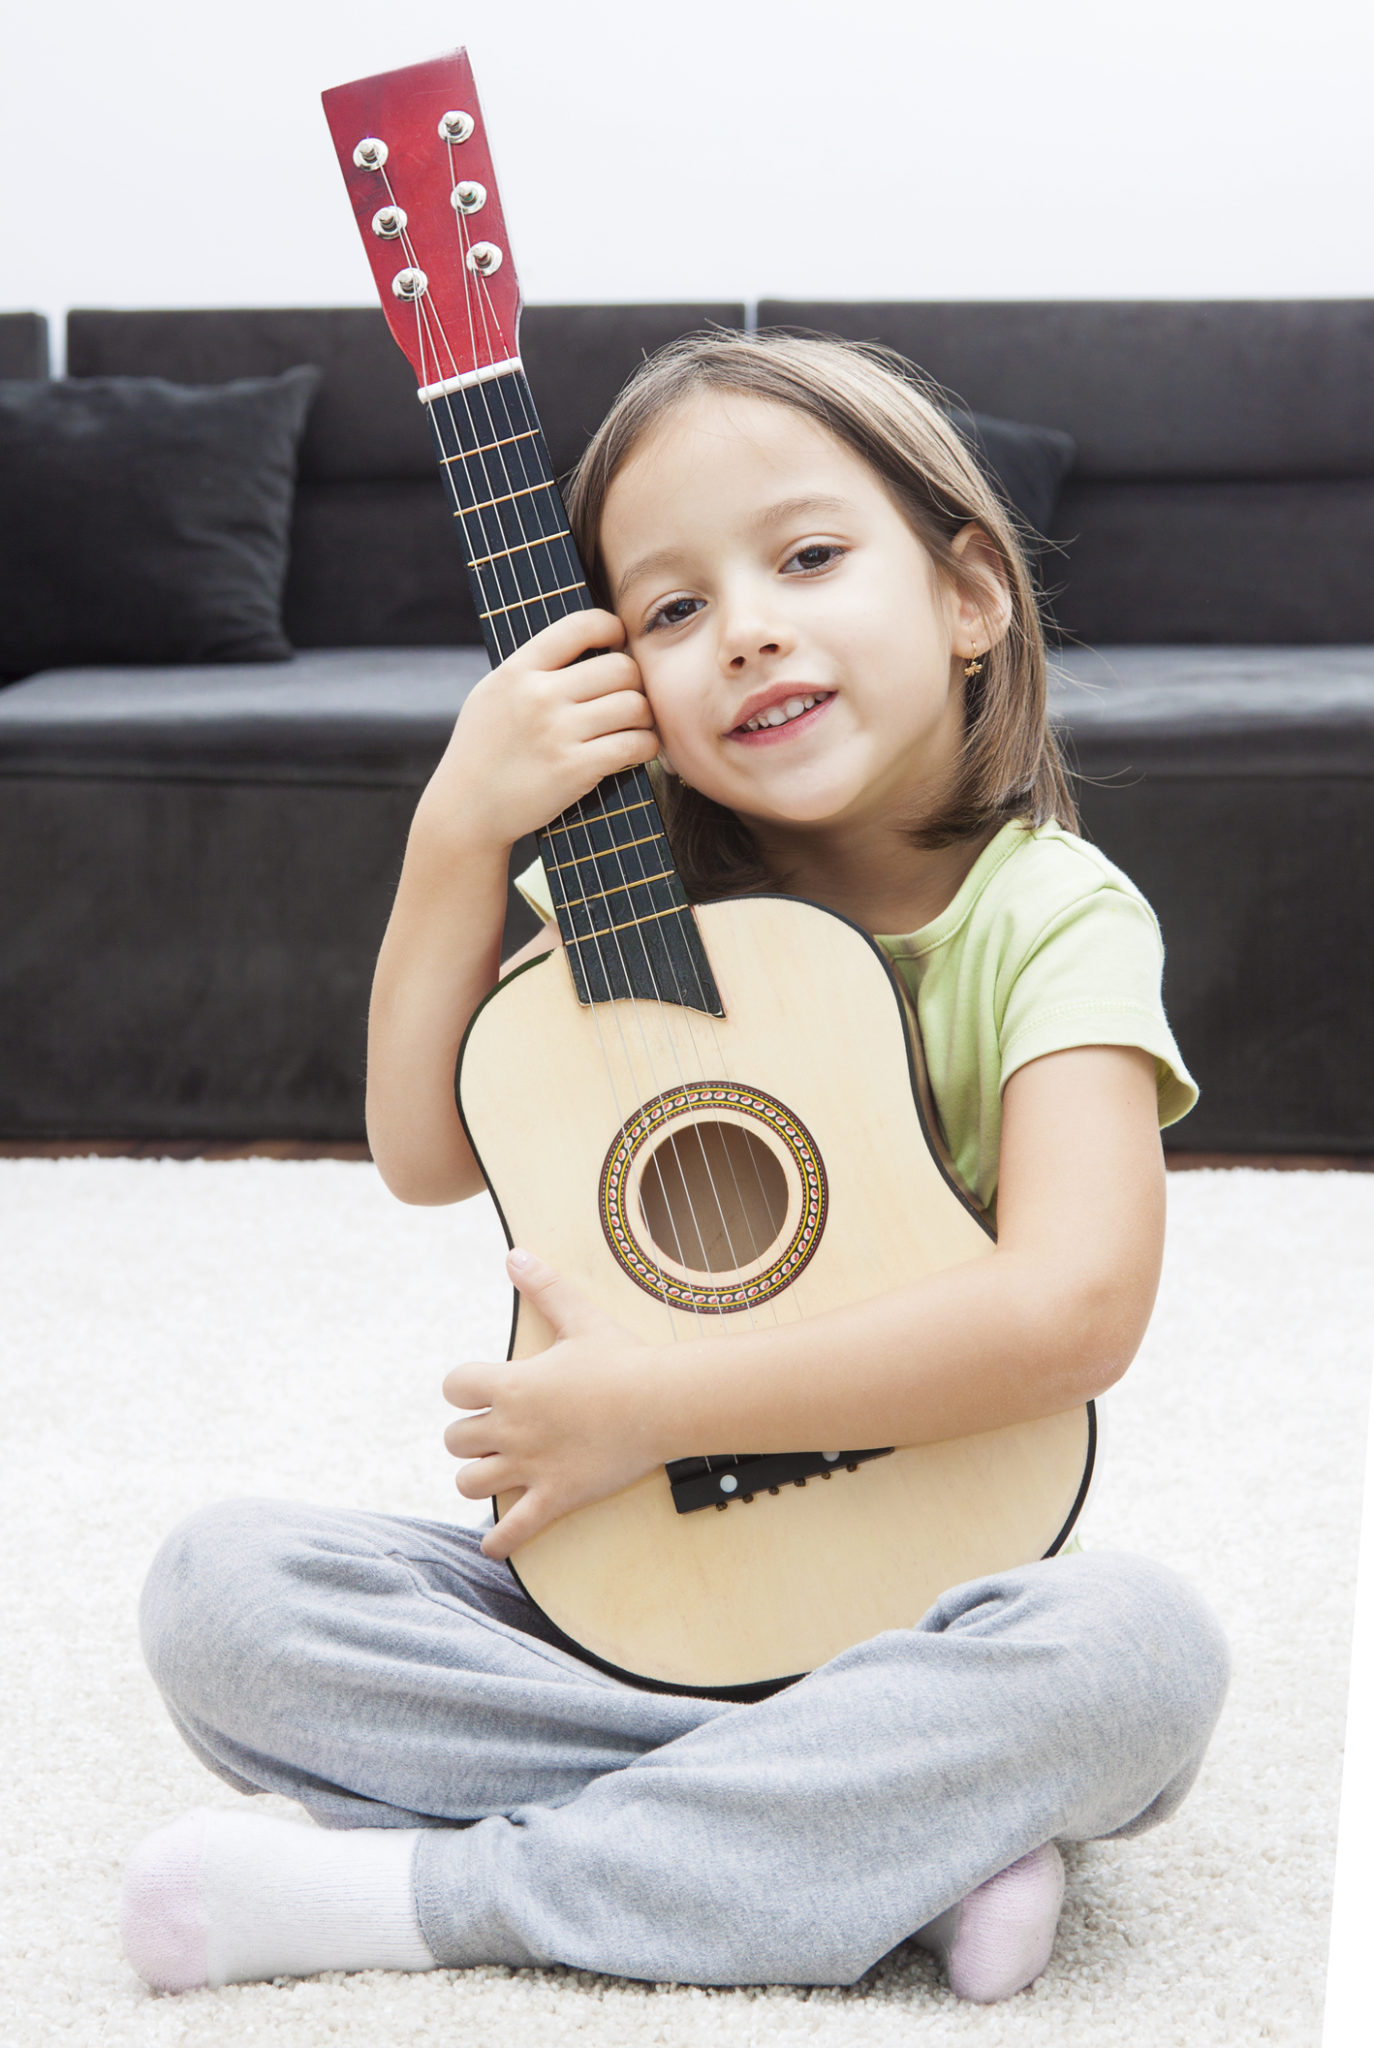 Stock photo of a smiling girl with a guitar